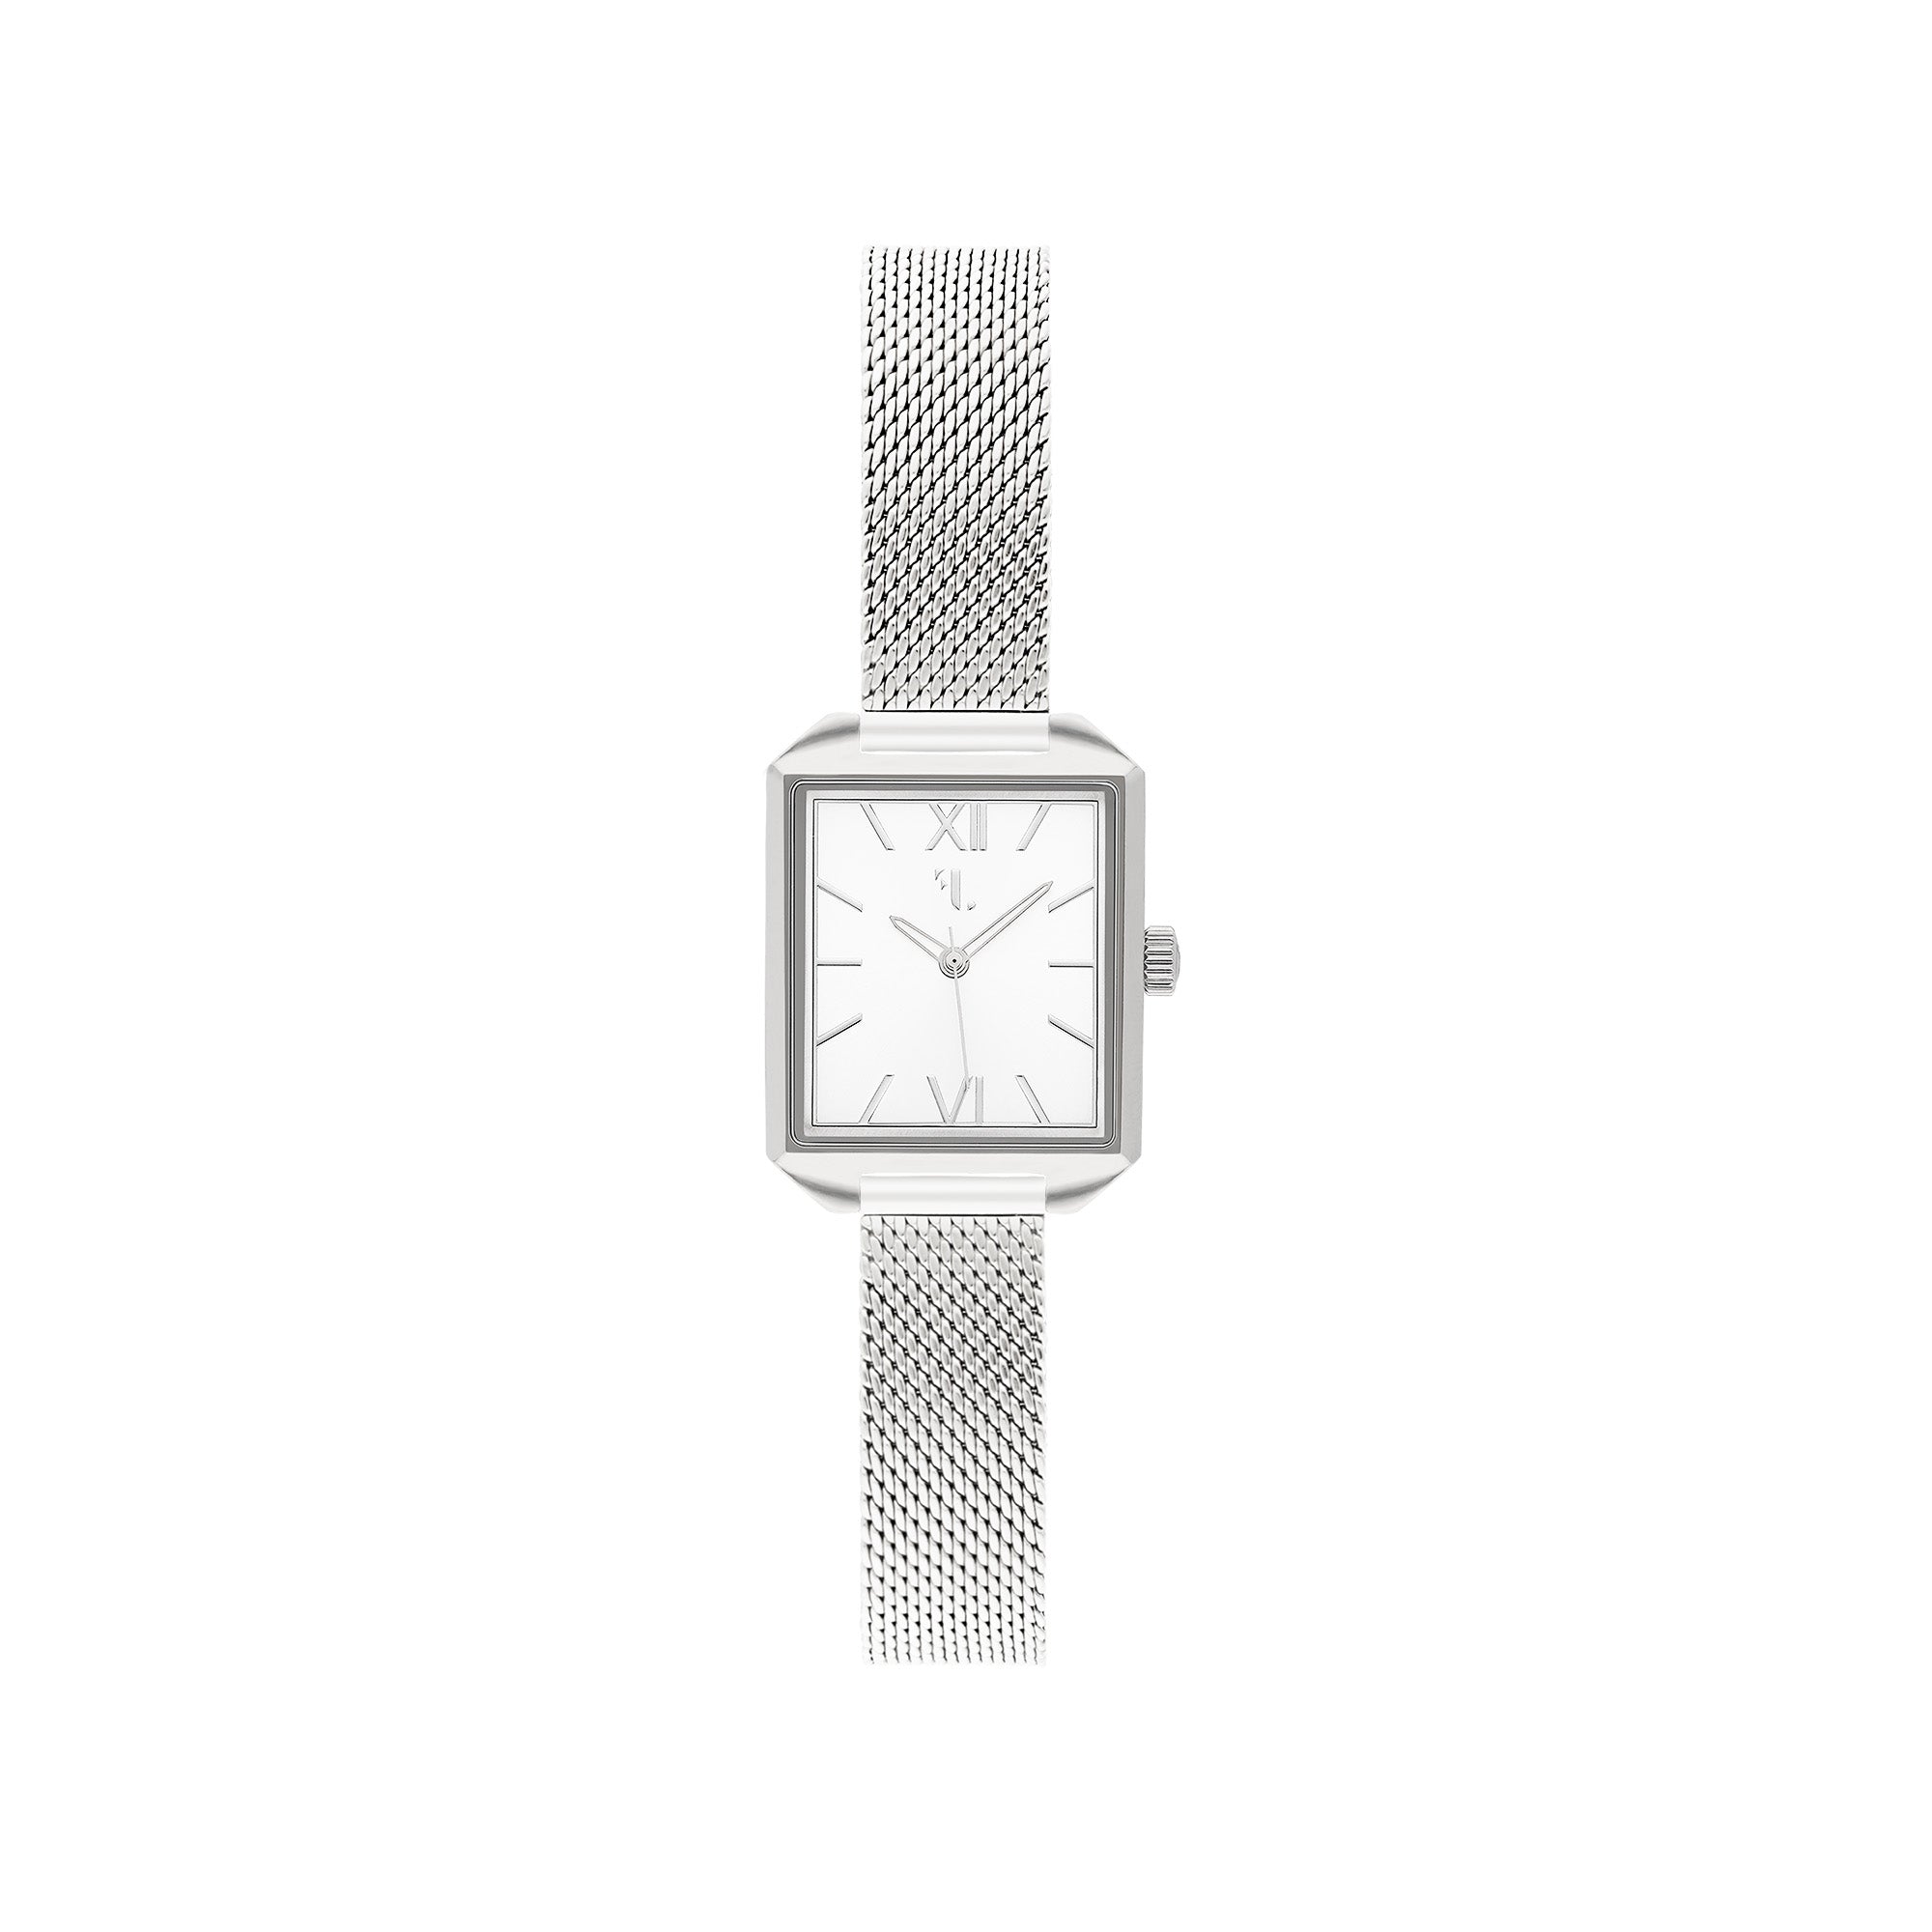 Ixelles watch by Five Jwlry, featuring a small square silver dial with matching silver case, handle, and mesh band. Designed in Montreal, it offers quartz movement, 5ATM water resistance, and a 2-year warranty. Comes with an interchangeable bracelet using the easy release function.